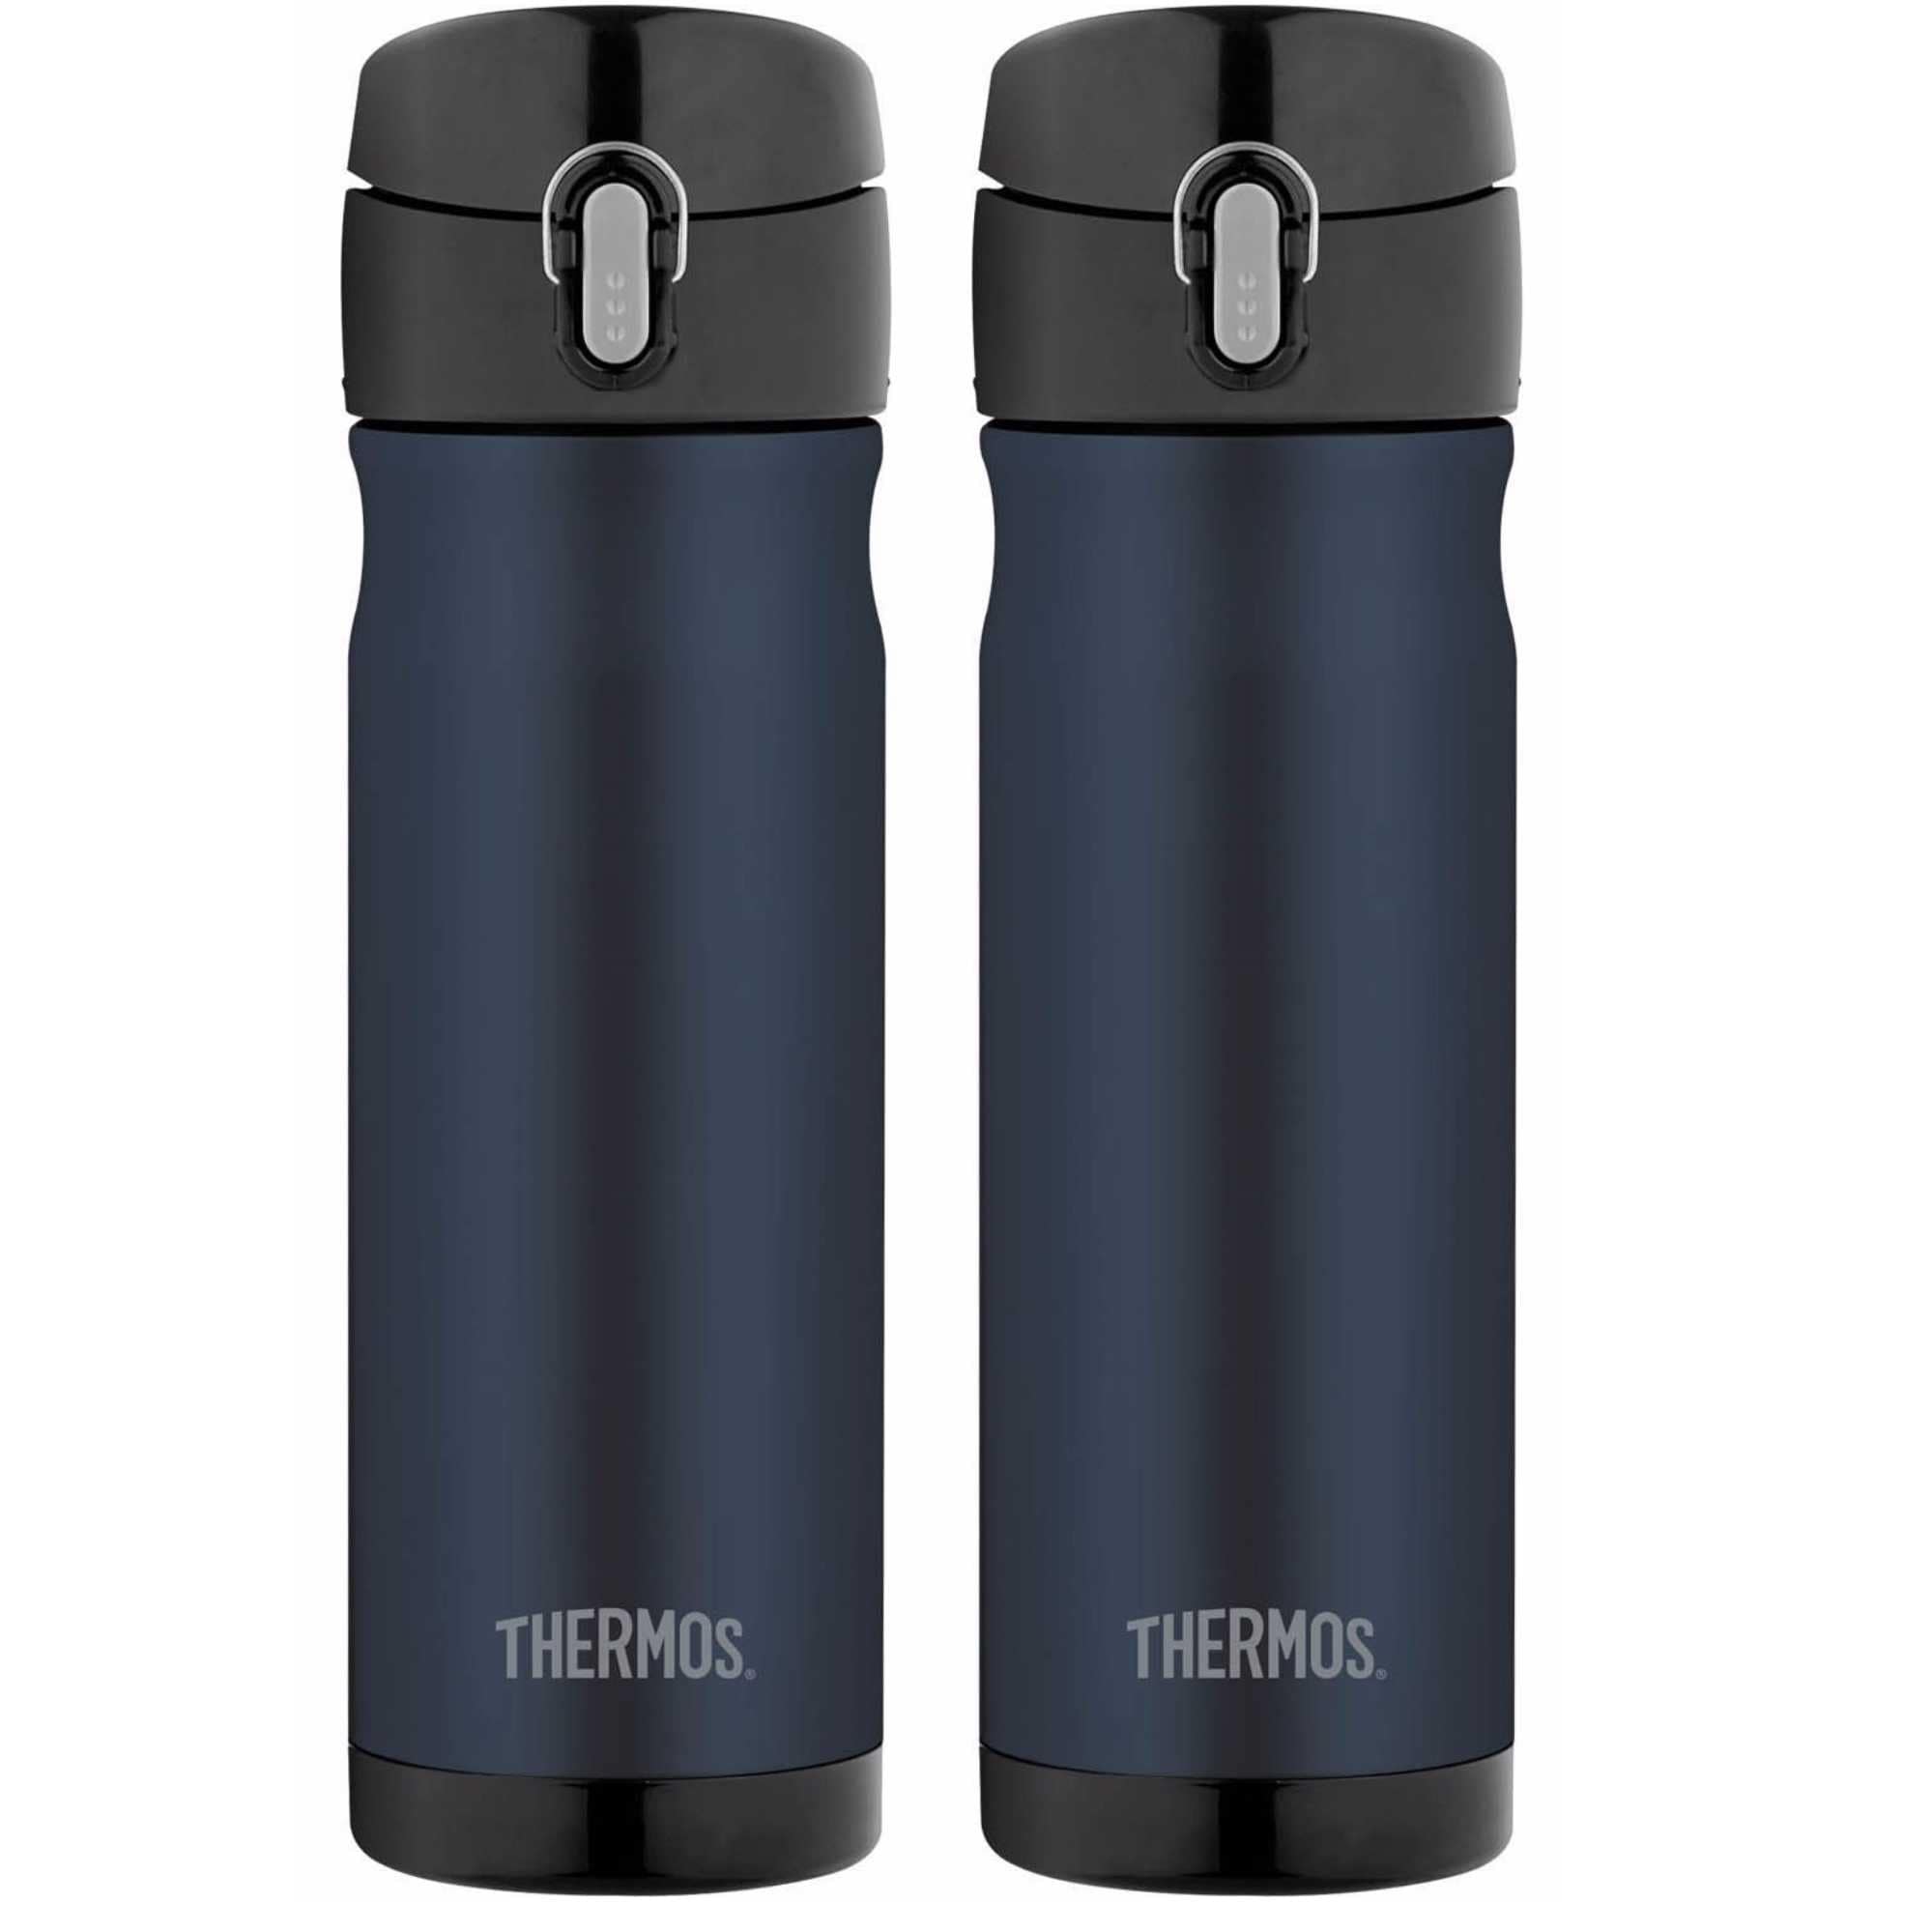 Thermoflask 16 oz Stainless Steel Insulated Water Bottles, 2 Pack